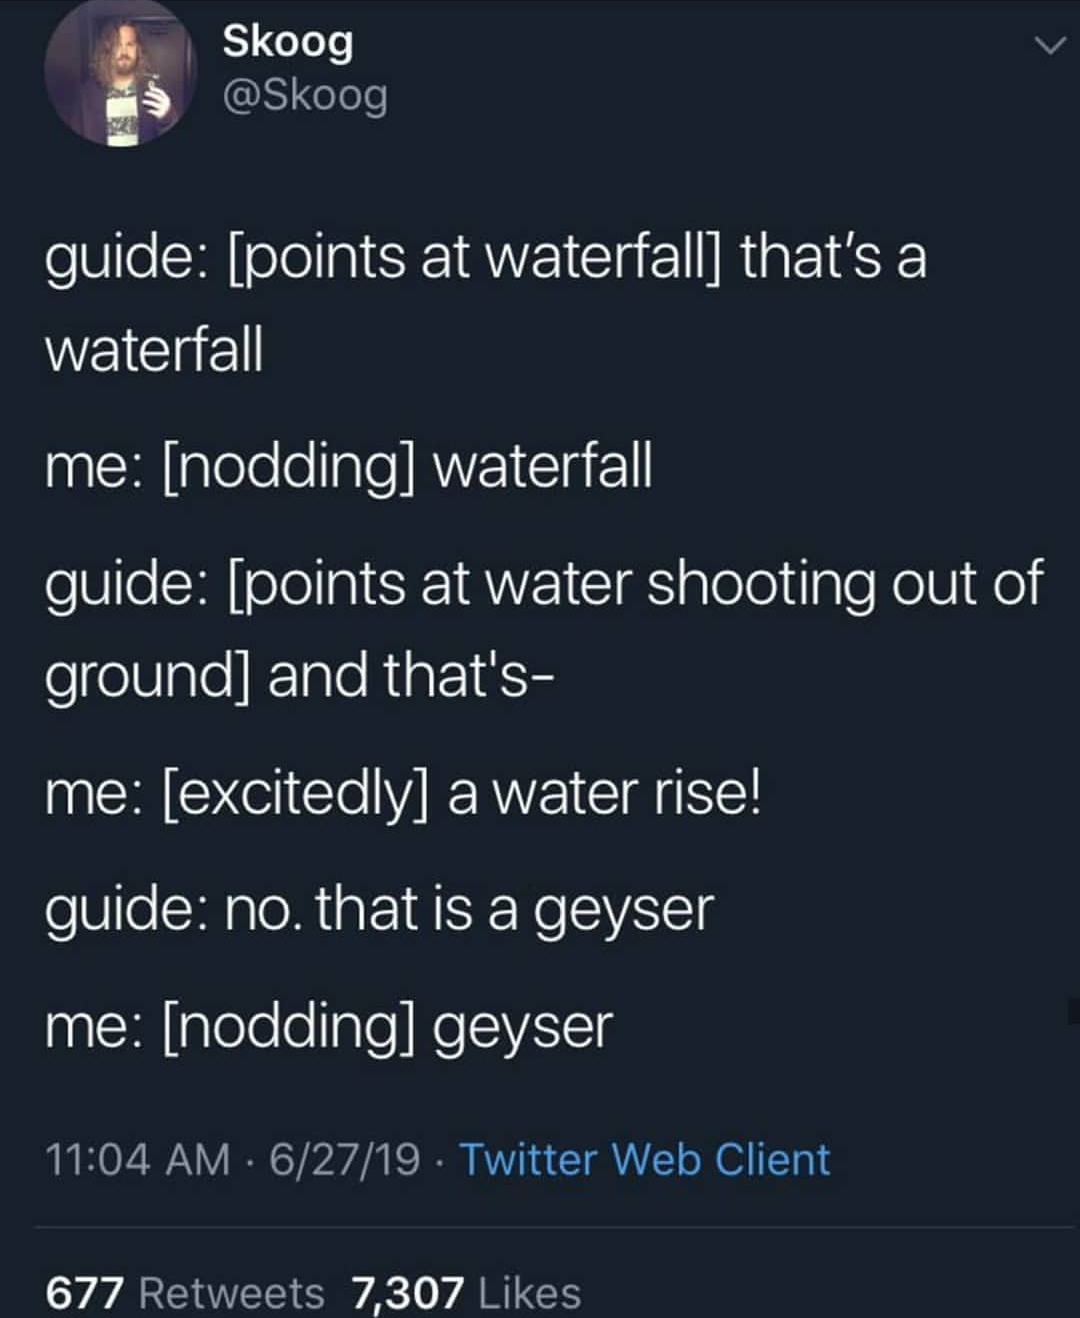 atmosphere - Skoog guide points at waterfall that's a waterfall me nodding waterfall guide points at water shooting out of ground and that's me excitedly a water rise! guide no. that is a geyser me nodding geyser 62719. Twitter Web Client 677 7,307